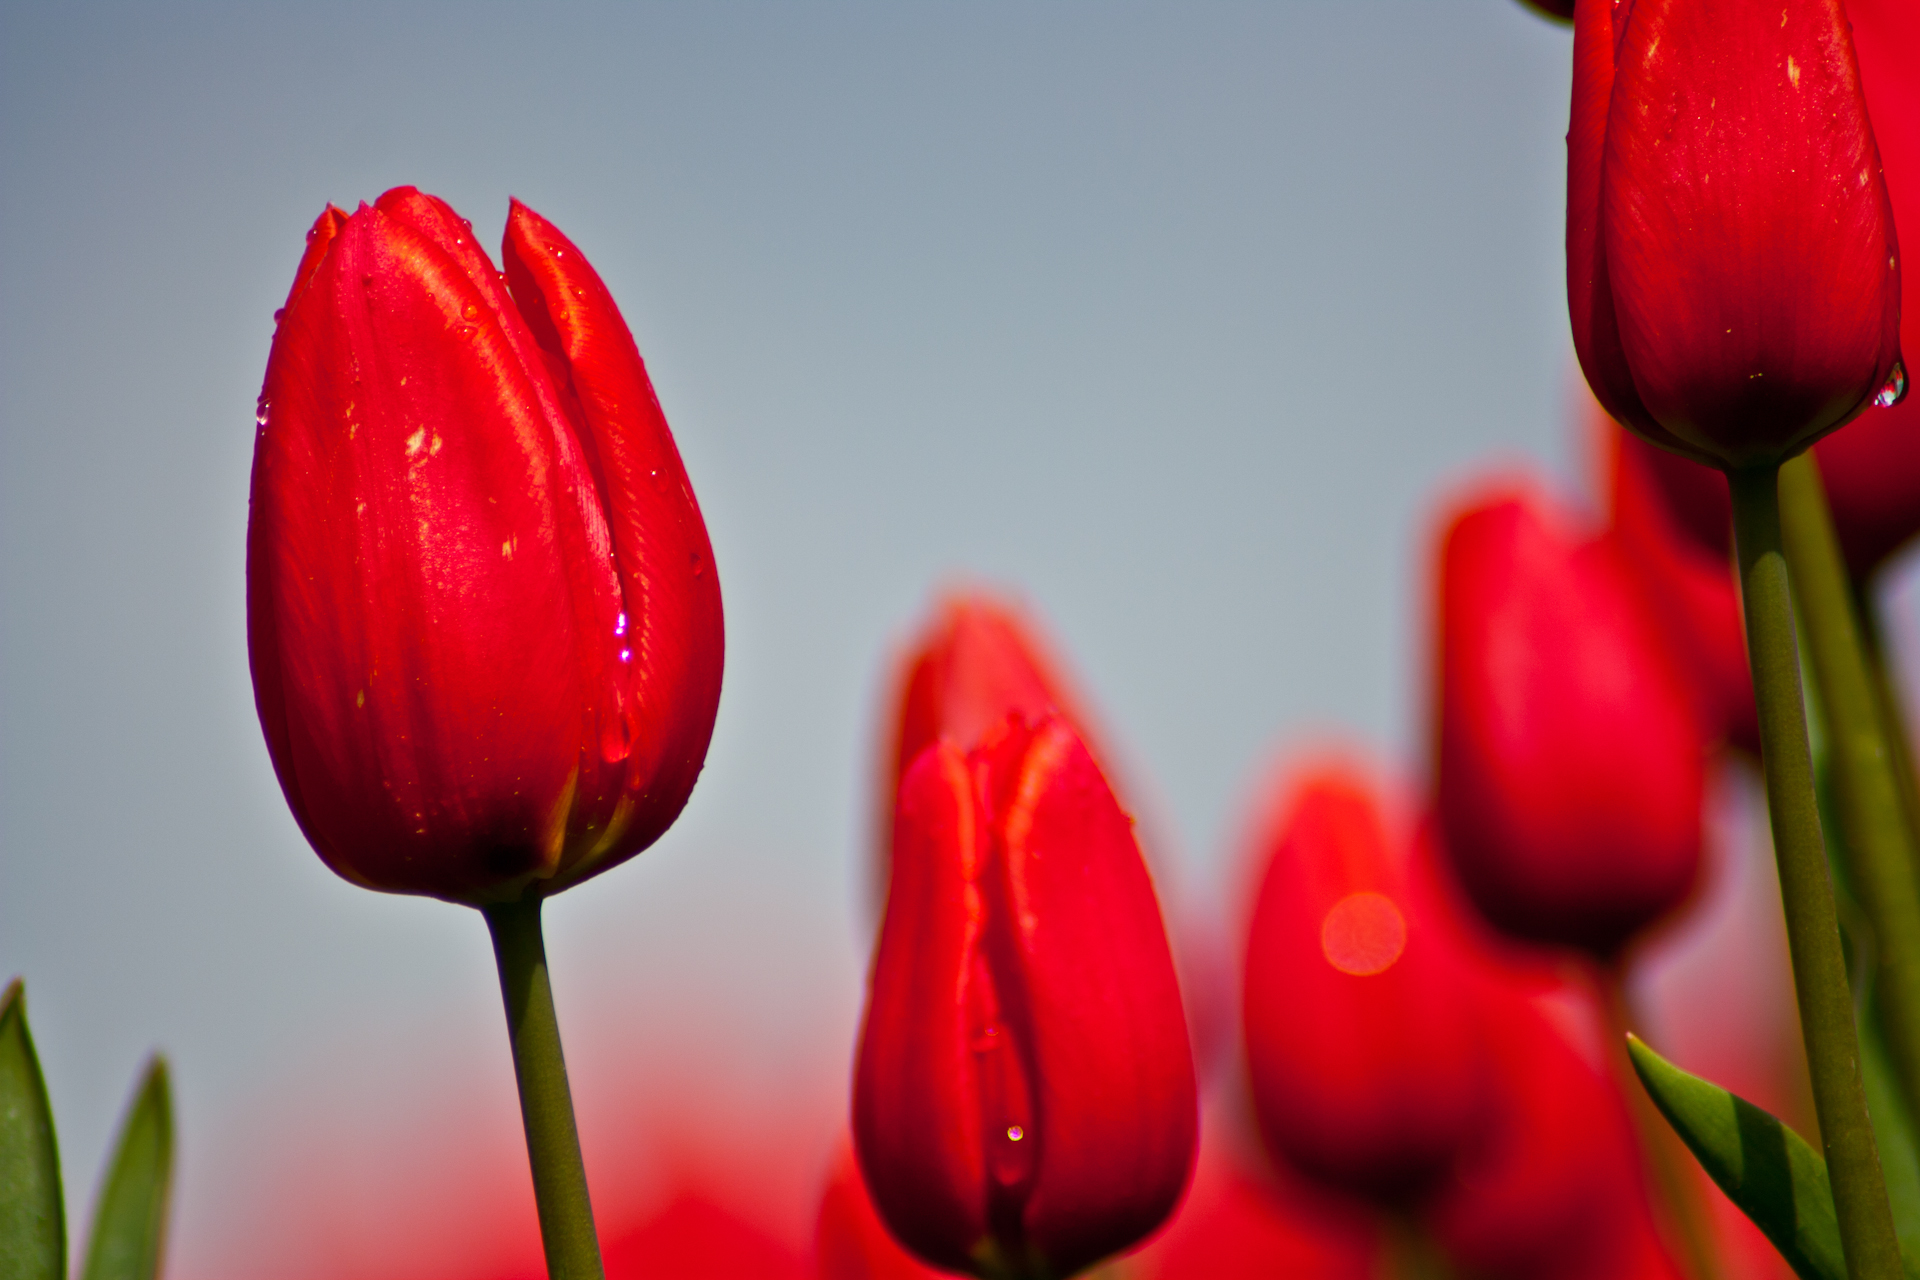 Gallery For Gt Red Tulip Wallpaper